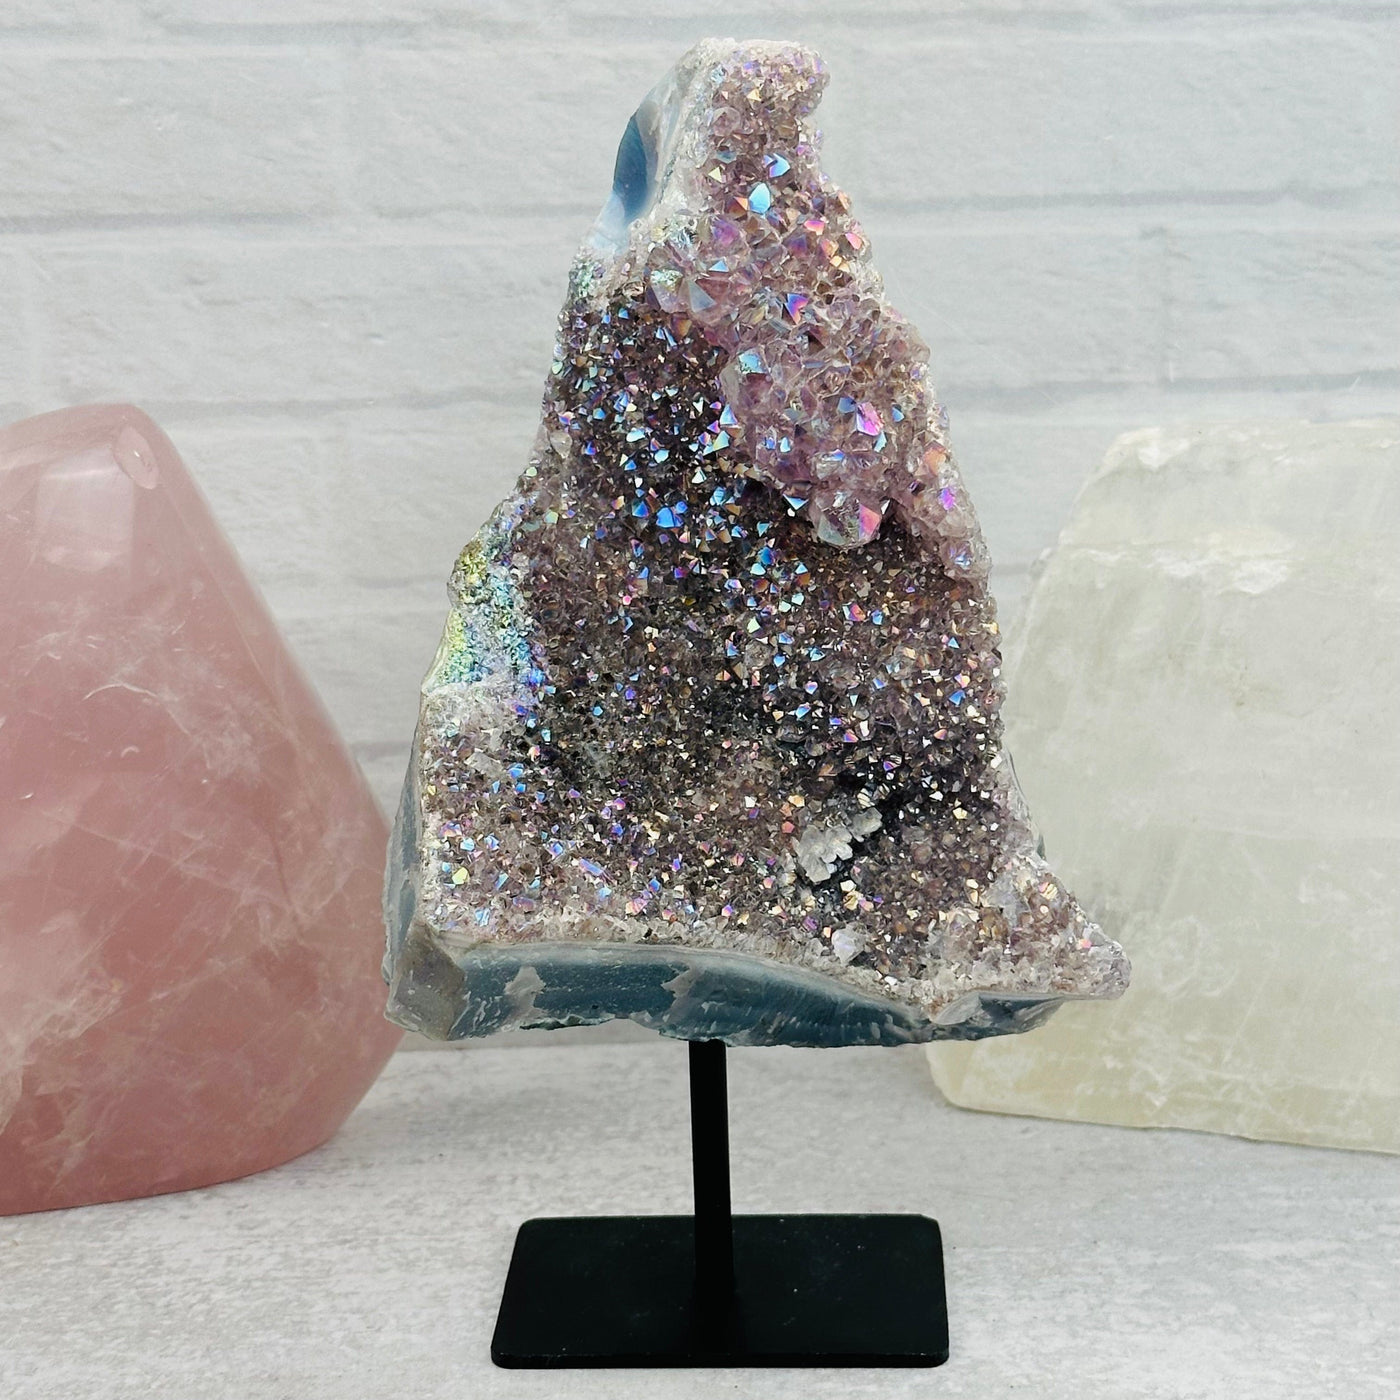 Amethyst Druzy Crystal with Angel Aura Pearly Finish on metal stand displayed as home decor 